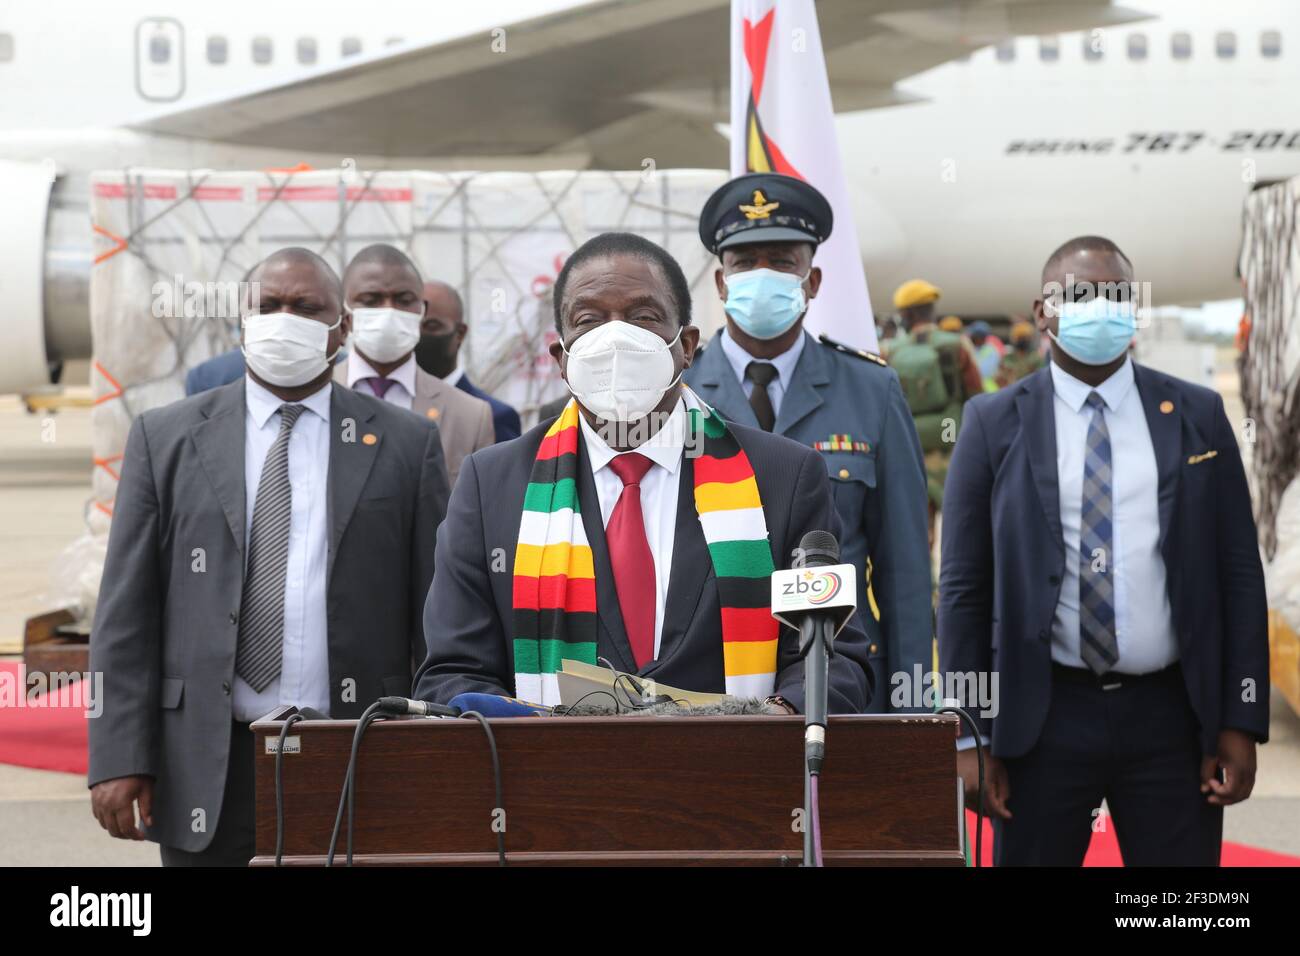 Harare, Zimbabwe. 16th Mar, 2021. Zimbabwean President Emmerson Mnangagwa delivers a speech as a batch of COVID-19 vaccines arrive at Robert Gabriel Mugabe International Airport in Harare, Zimbabwe, March 16, 2021. Zimbabwe on Tuesday received a second batch of Sinopharm doses donated by China plus an additional Sinovac doses commercially procured by the government. Credit: Zhang Yuliang/Xinhua/Alamy Live News Stock Photo